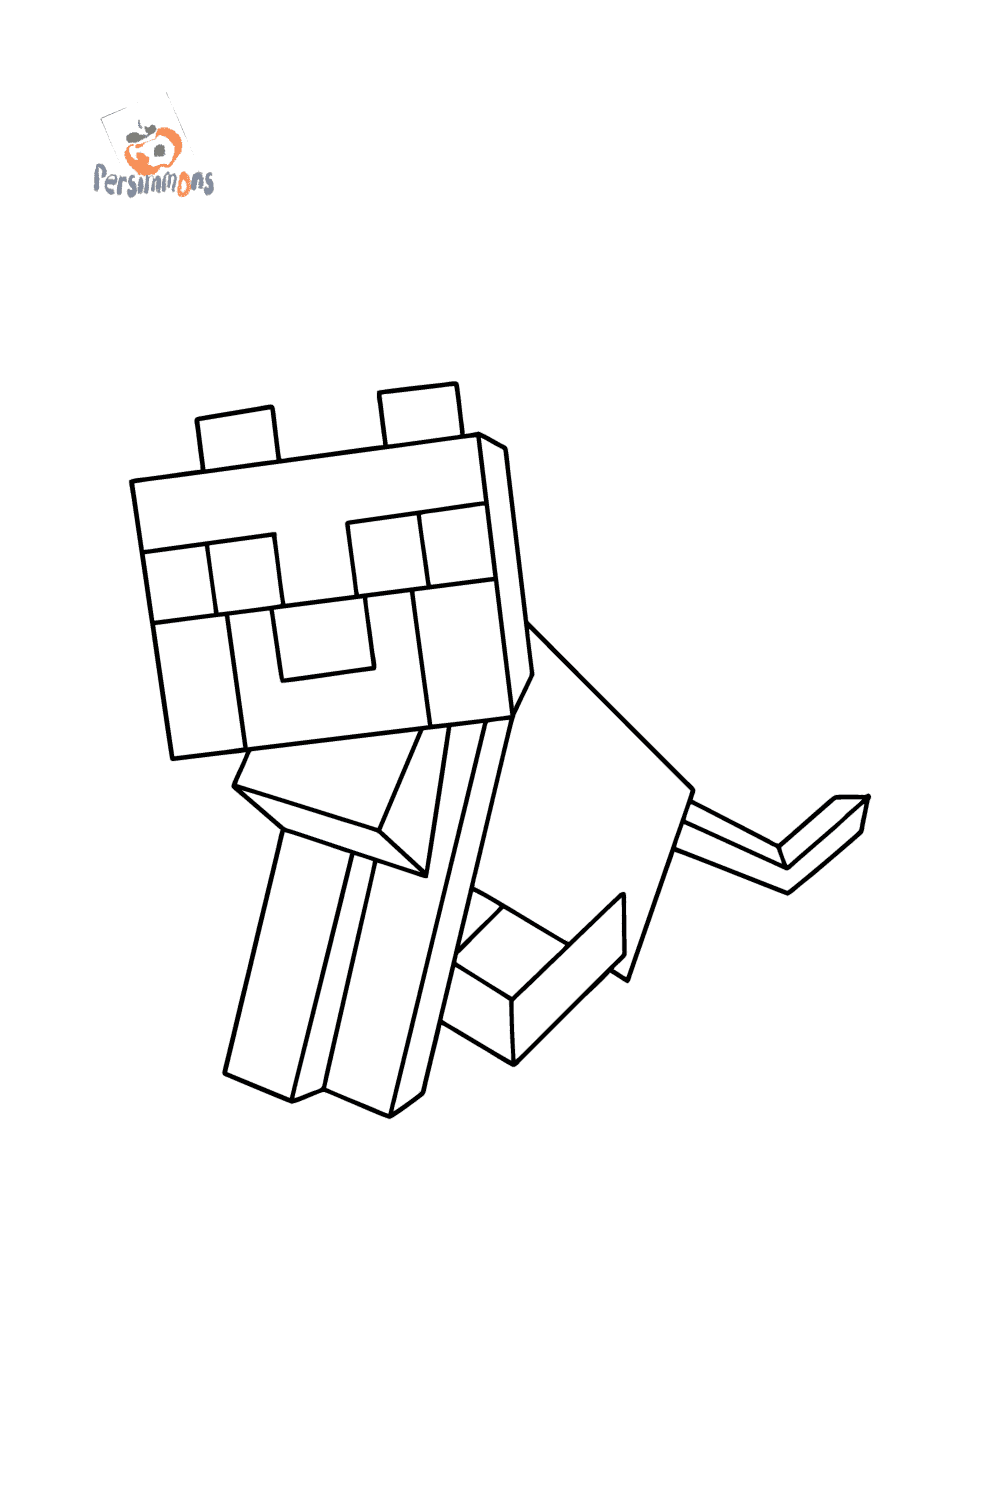 64 Coloring Pages Minecraft Cat Latest Free - Coloring Pages Printable